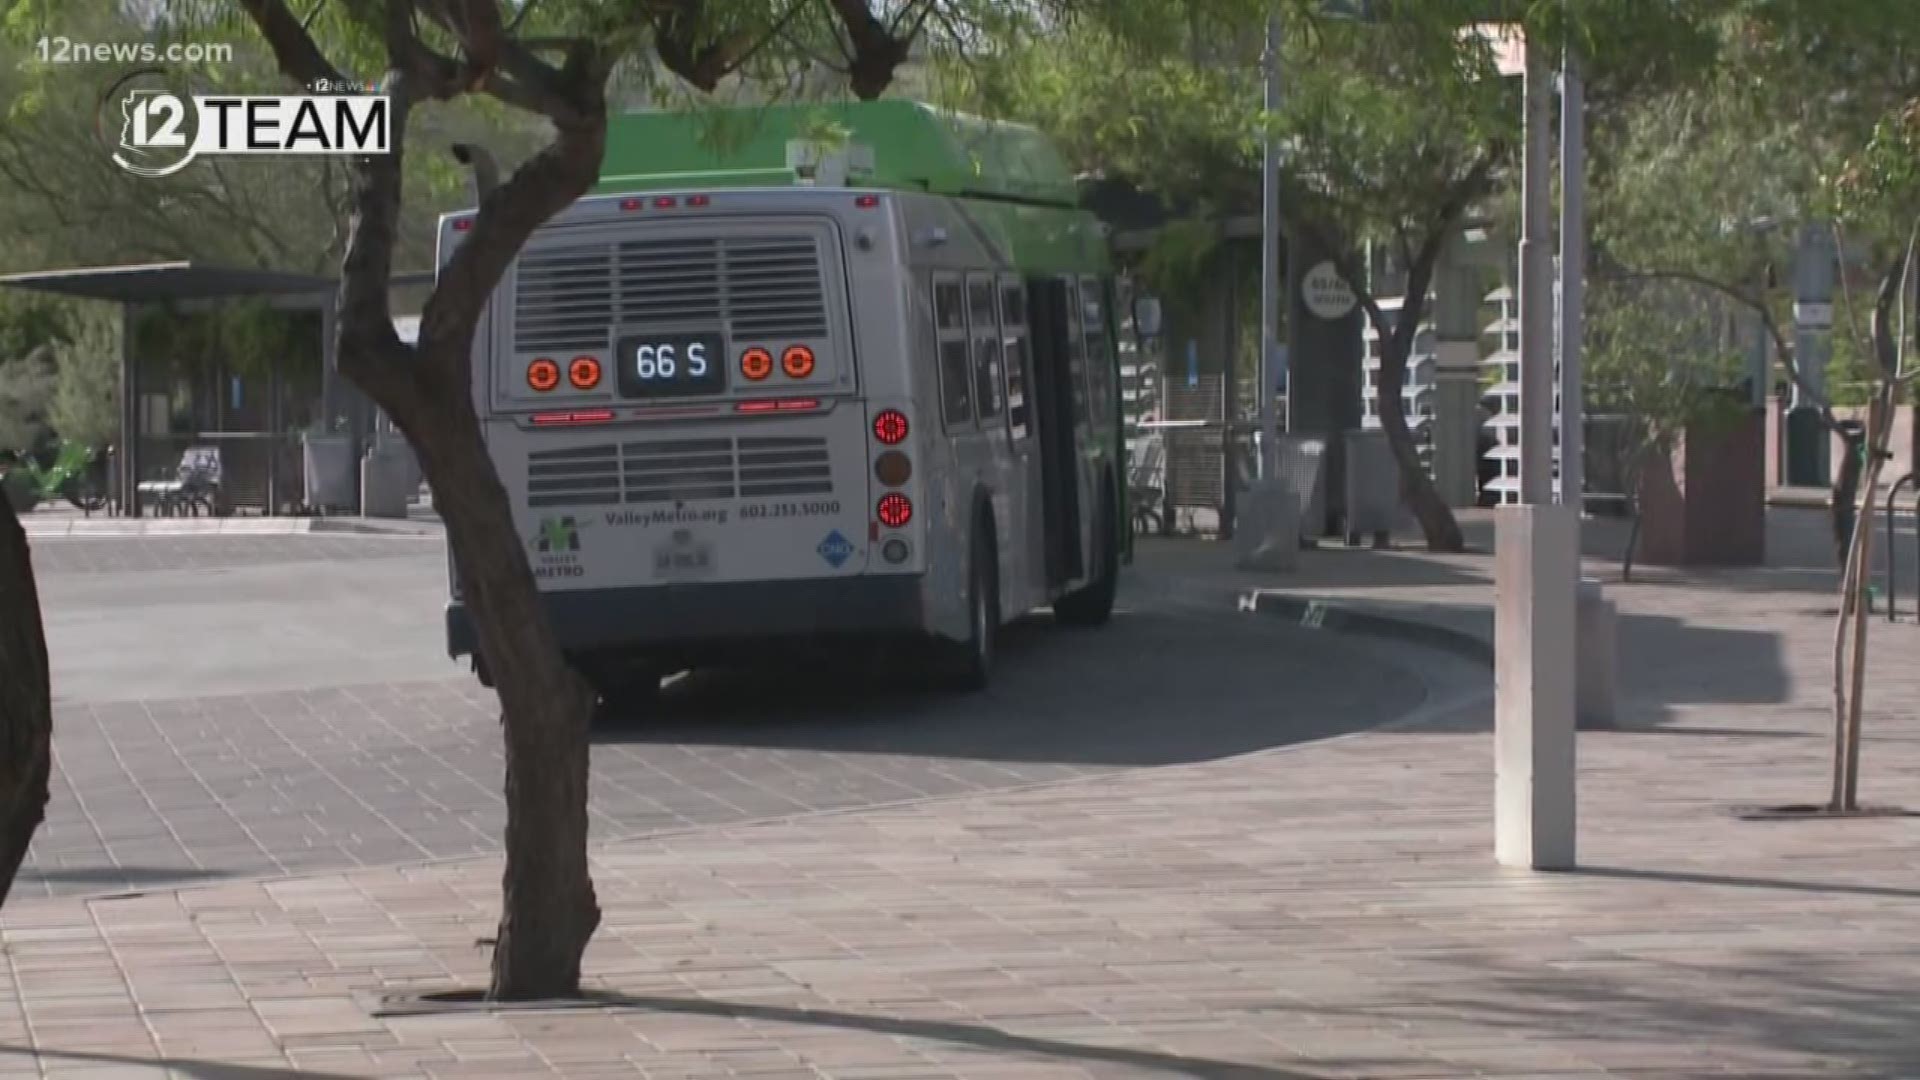 The City of Phoenix says they provide bus drivers with protective gear when available. But one bus driver says because of shortages he's only received gloves.